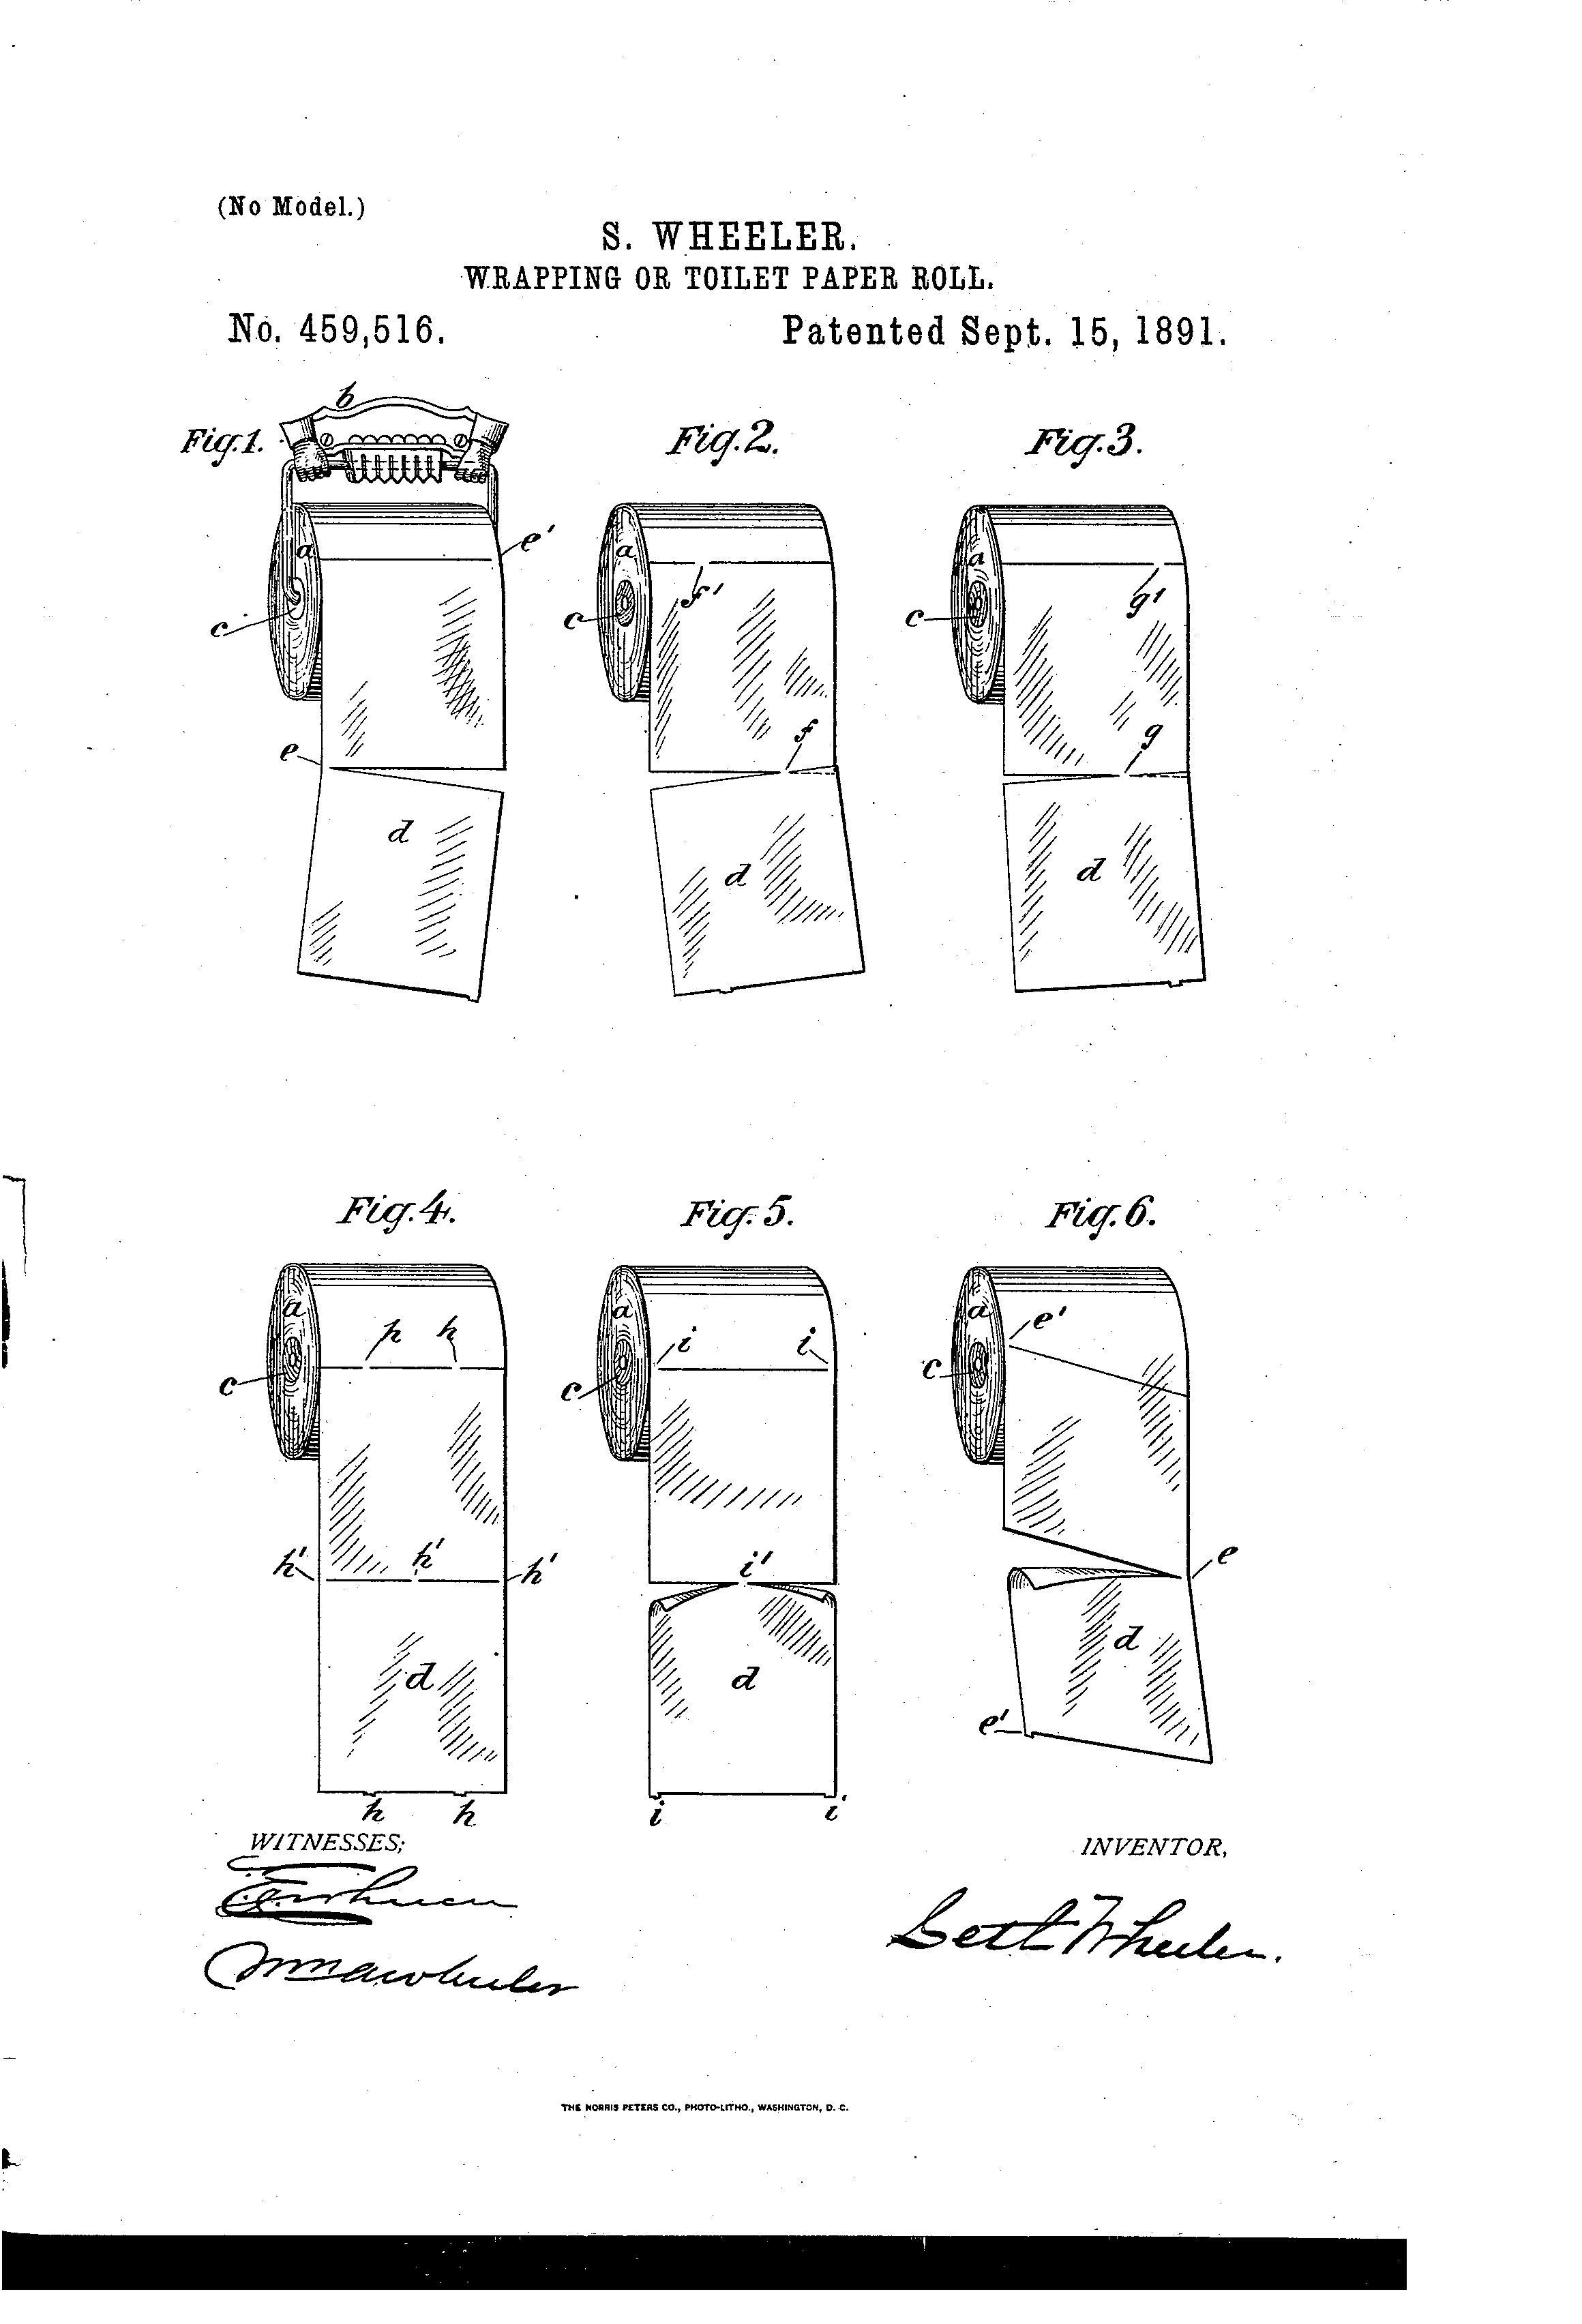 Original Patent For Perforated Toilet Paper On A Roll